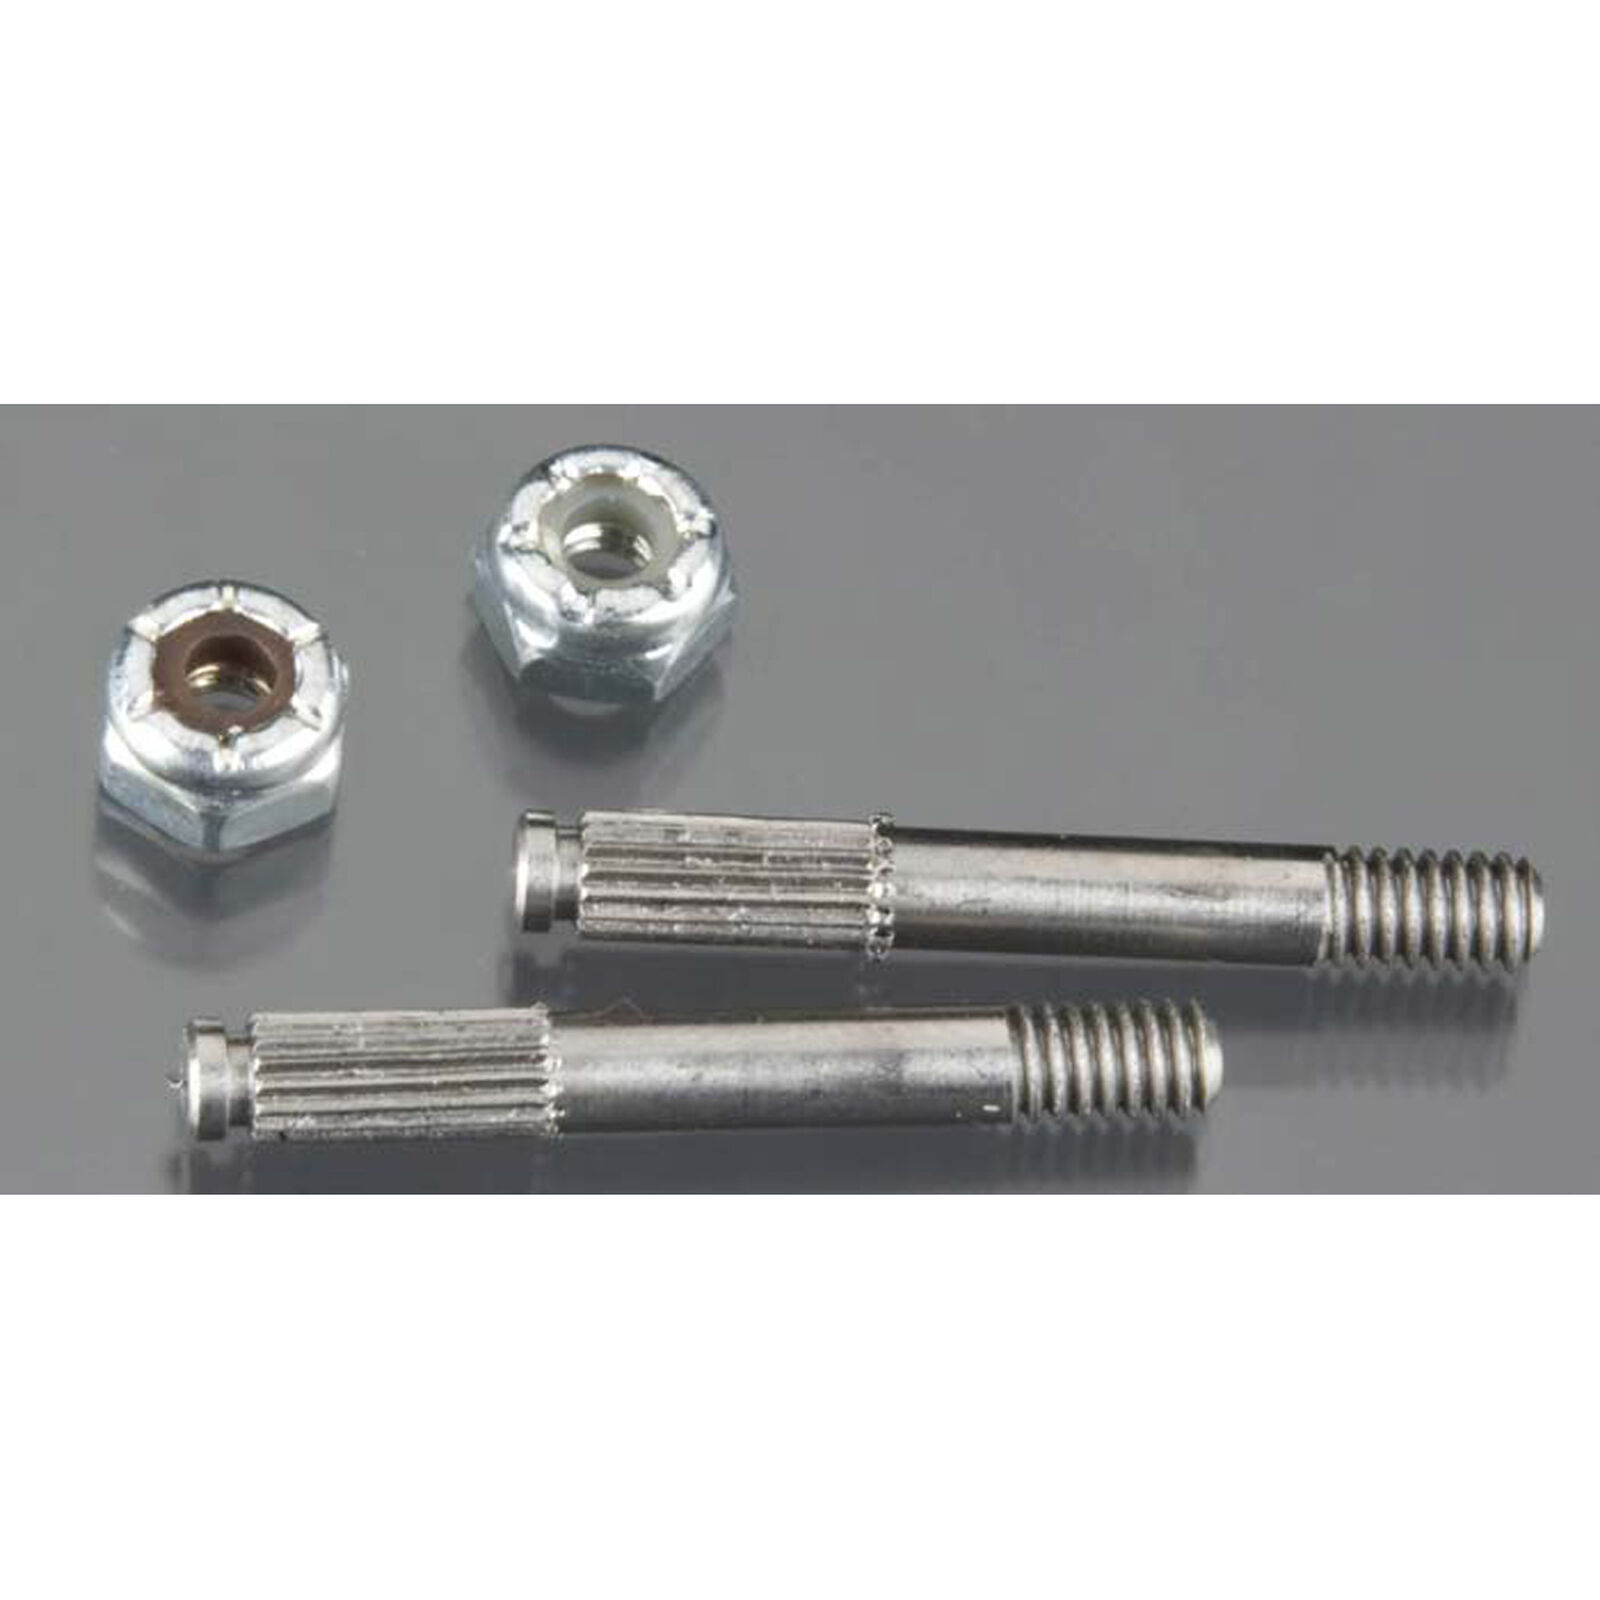 Threaded Stub Axles with Nuts (2)